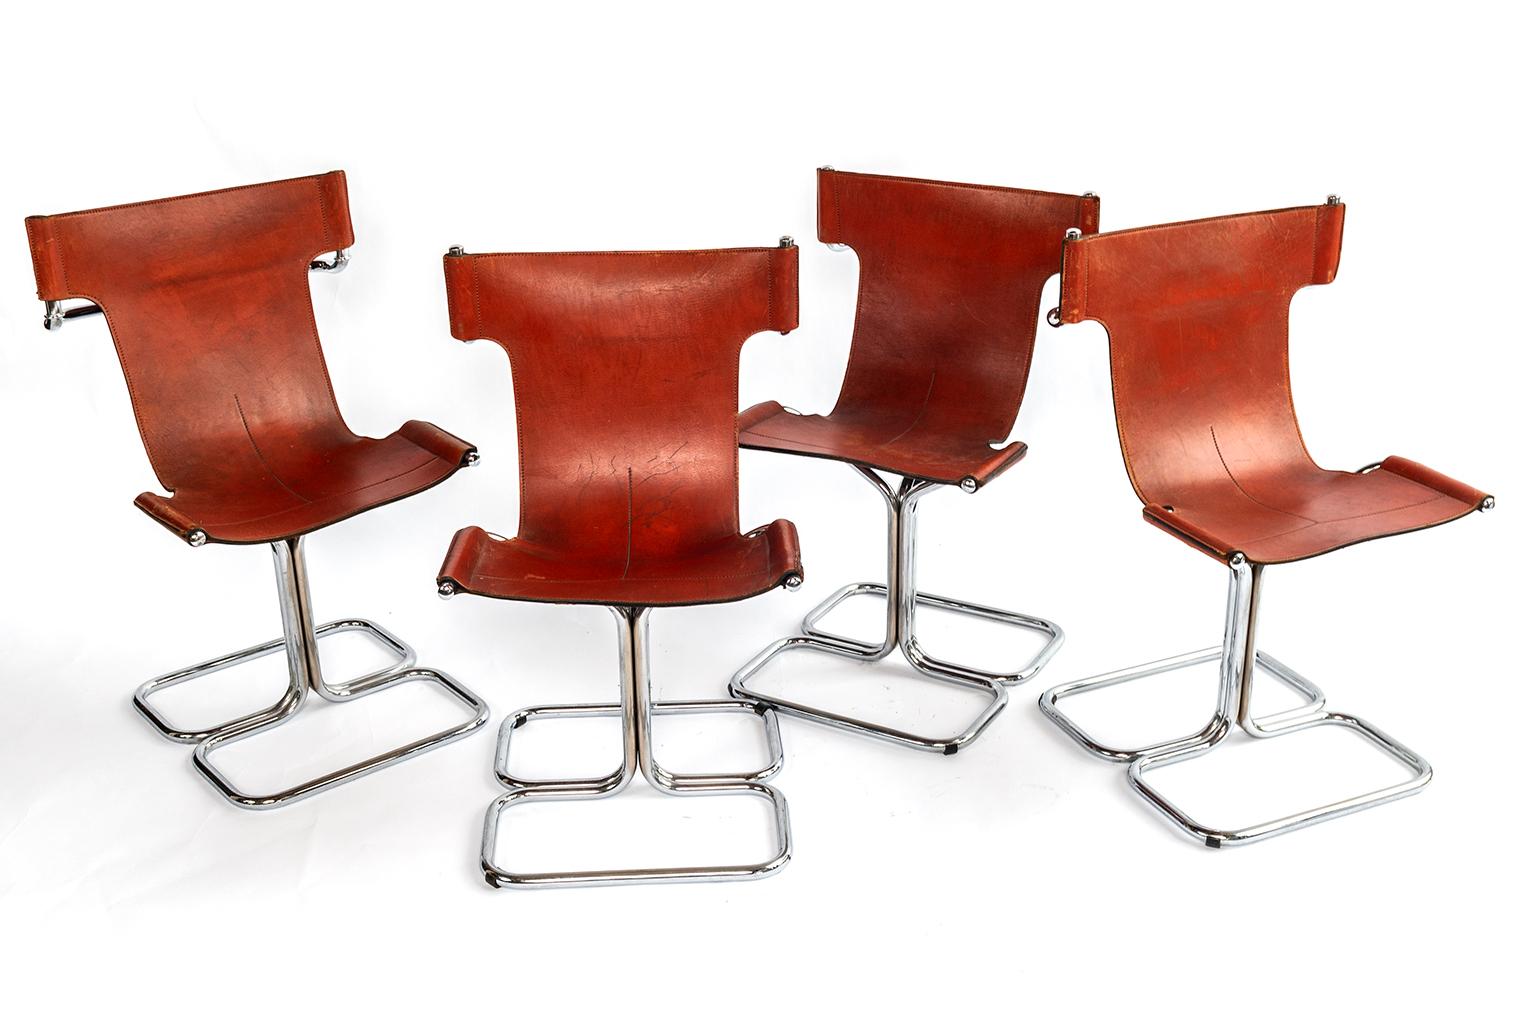 Set of Four Mid-Century Modern T Chairs in Chrome and Cognac Leather. For Sale 2